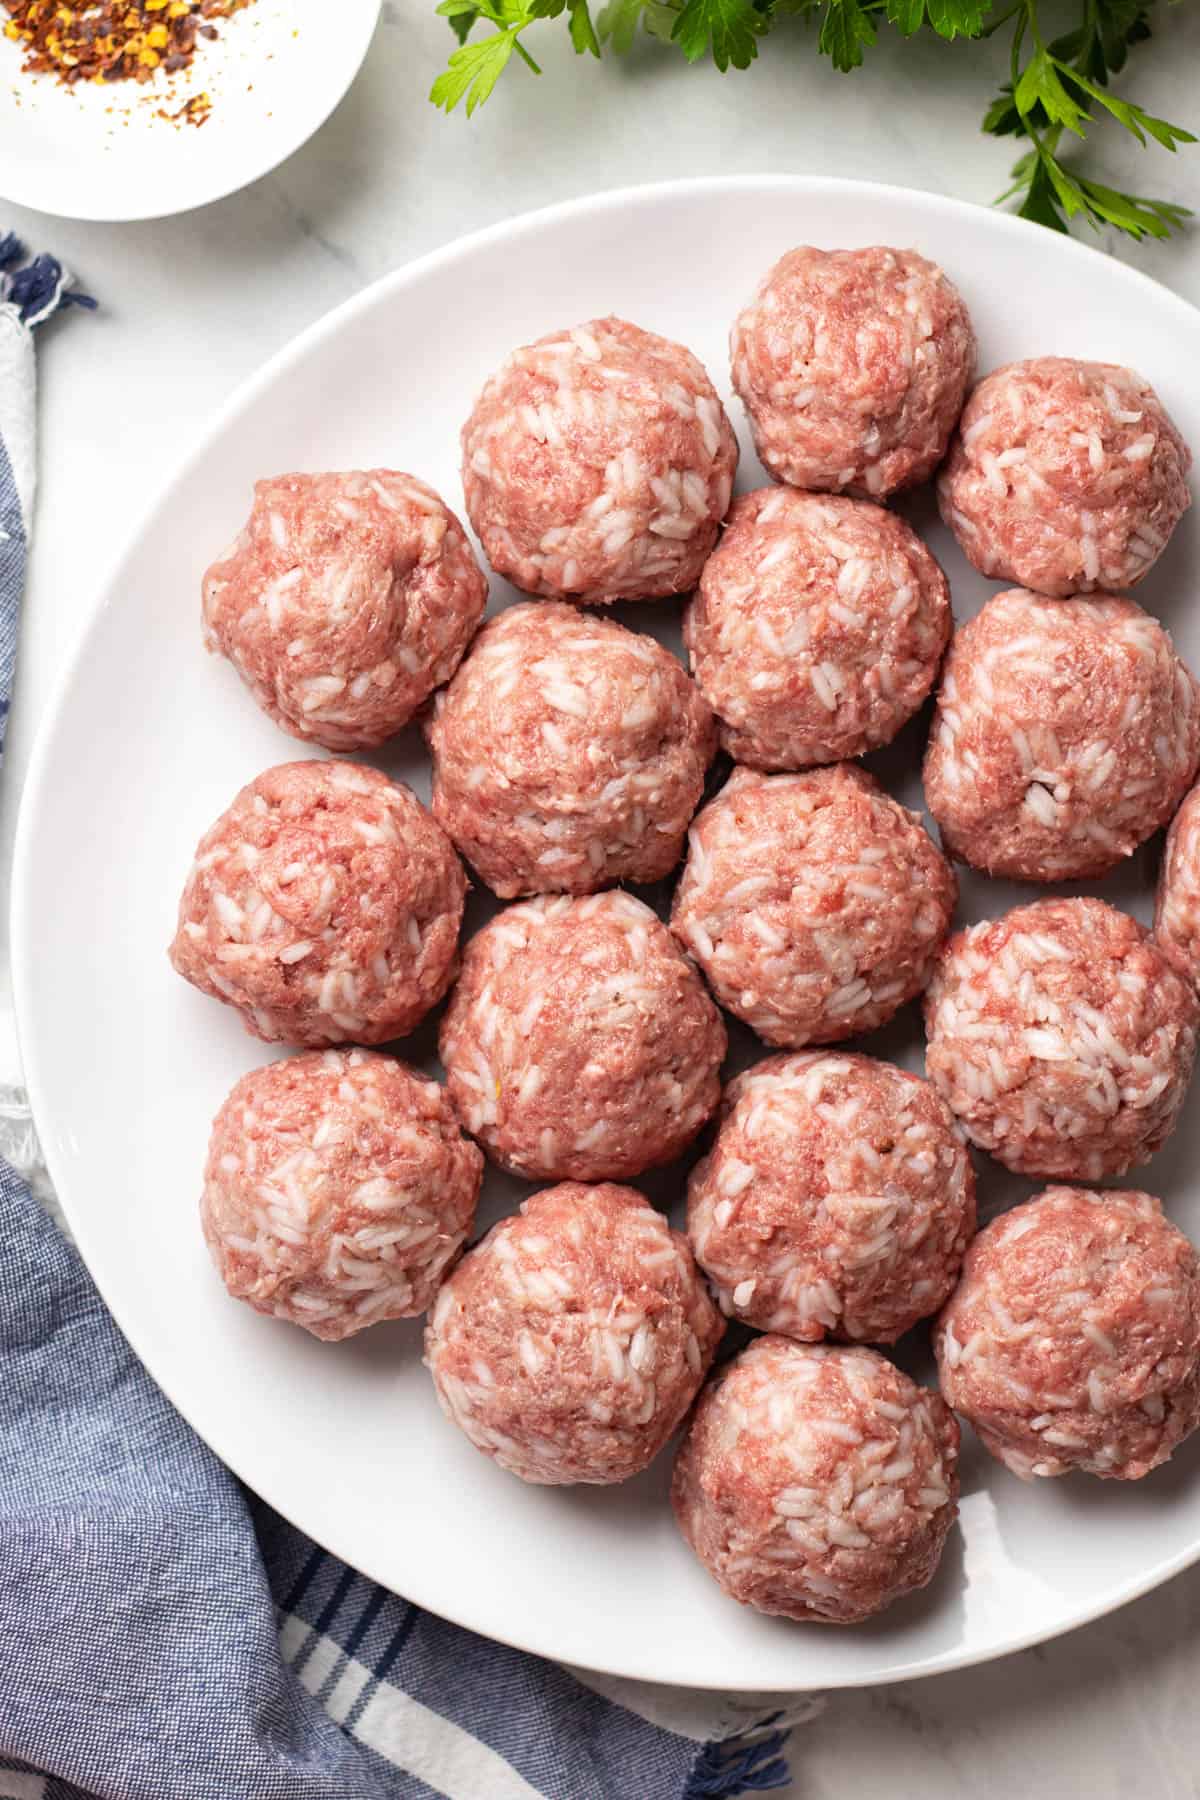 Uncooked meatballs with rice on a plate.